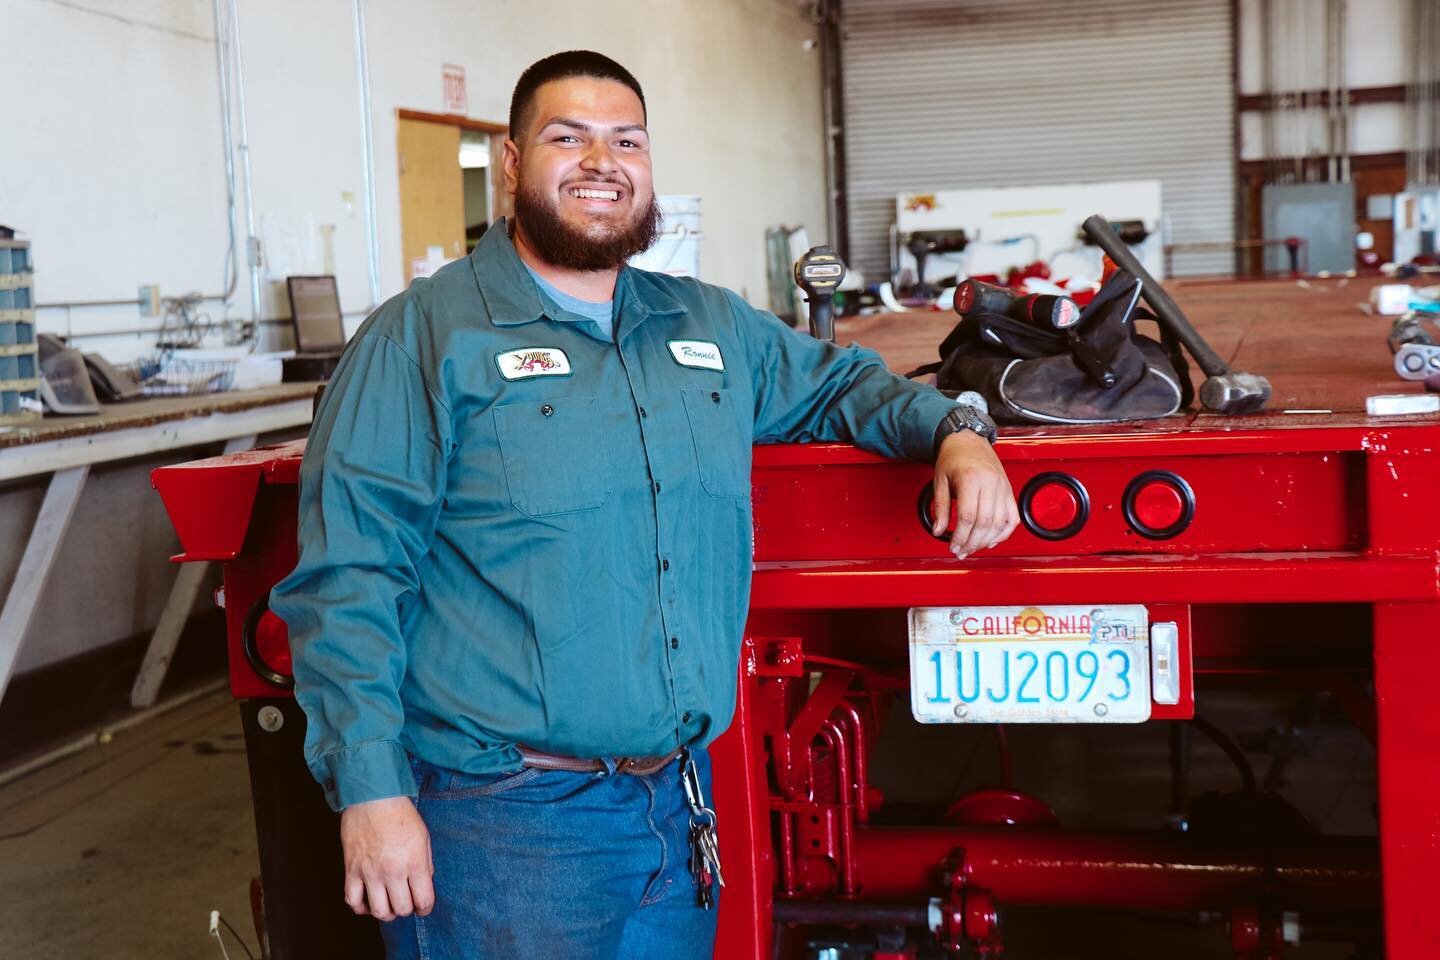 You guessed it...it's time for another #SpotlightSunday! Ronnie Ceballos of Porterville has been with us for the last four years as a trailer mechanic and fieldman, meaning he inspects and services trailers to keep them safe and on the road. He alway